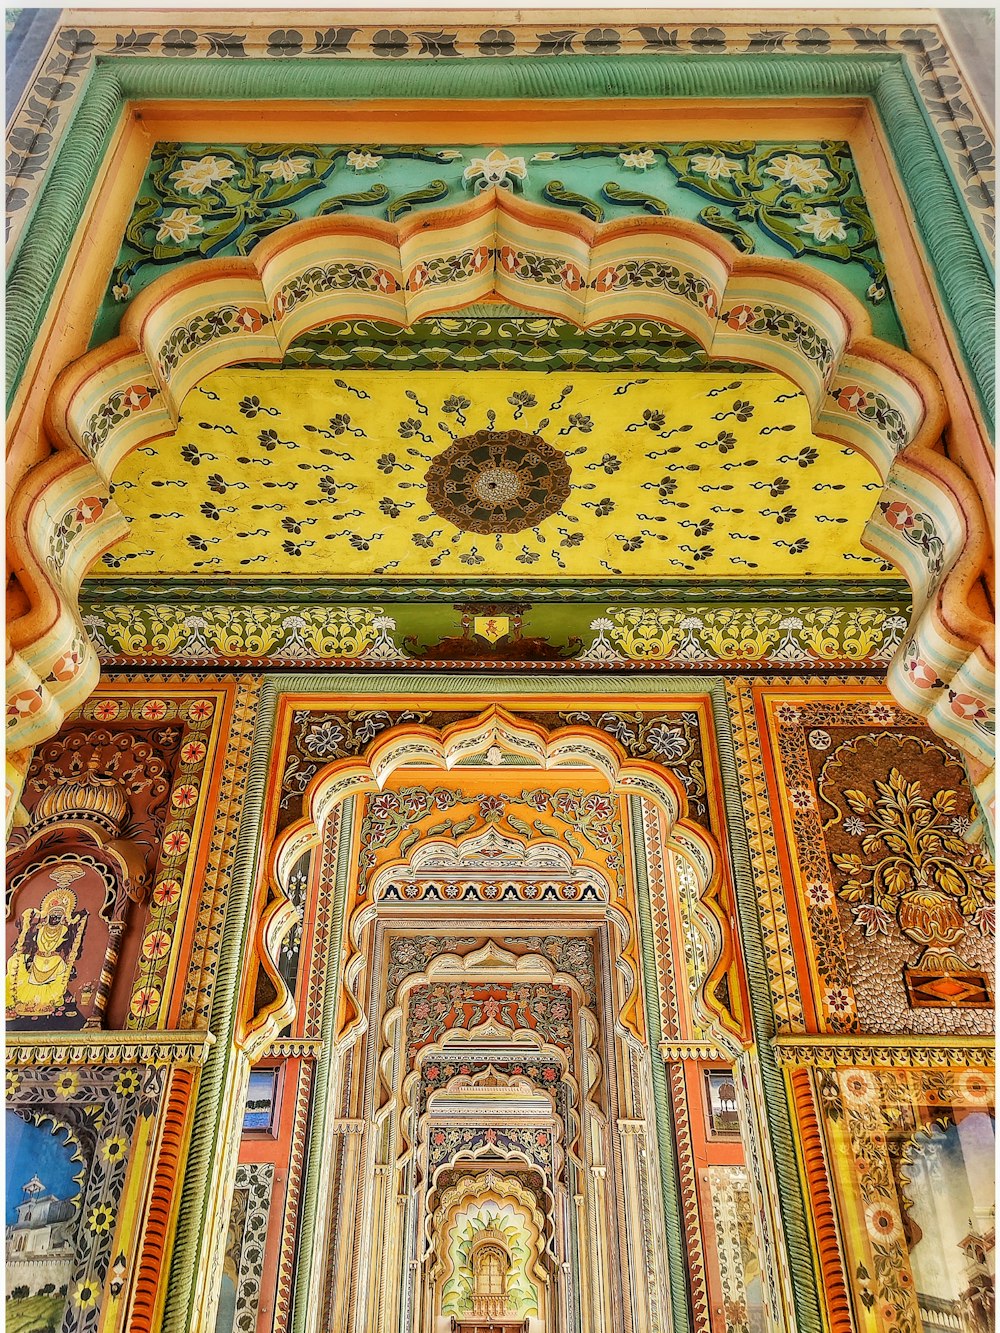 a colorful building with intricately painted walls and ceilings